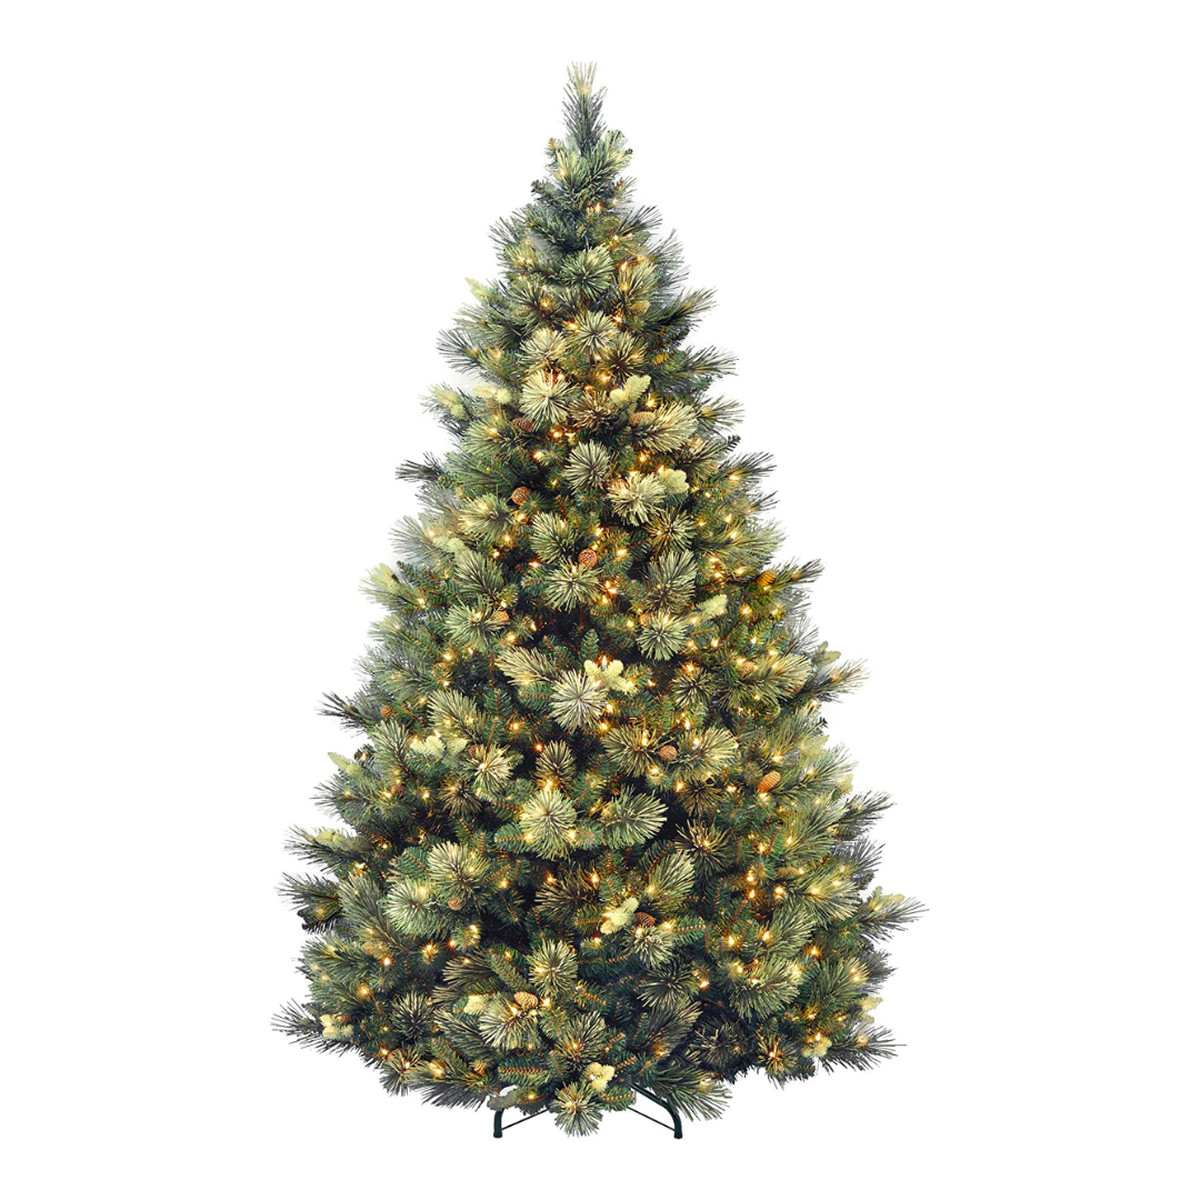 Pre-lit green National Tree Company artificial Christmas tree with clear lights